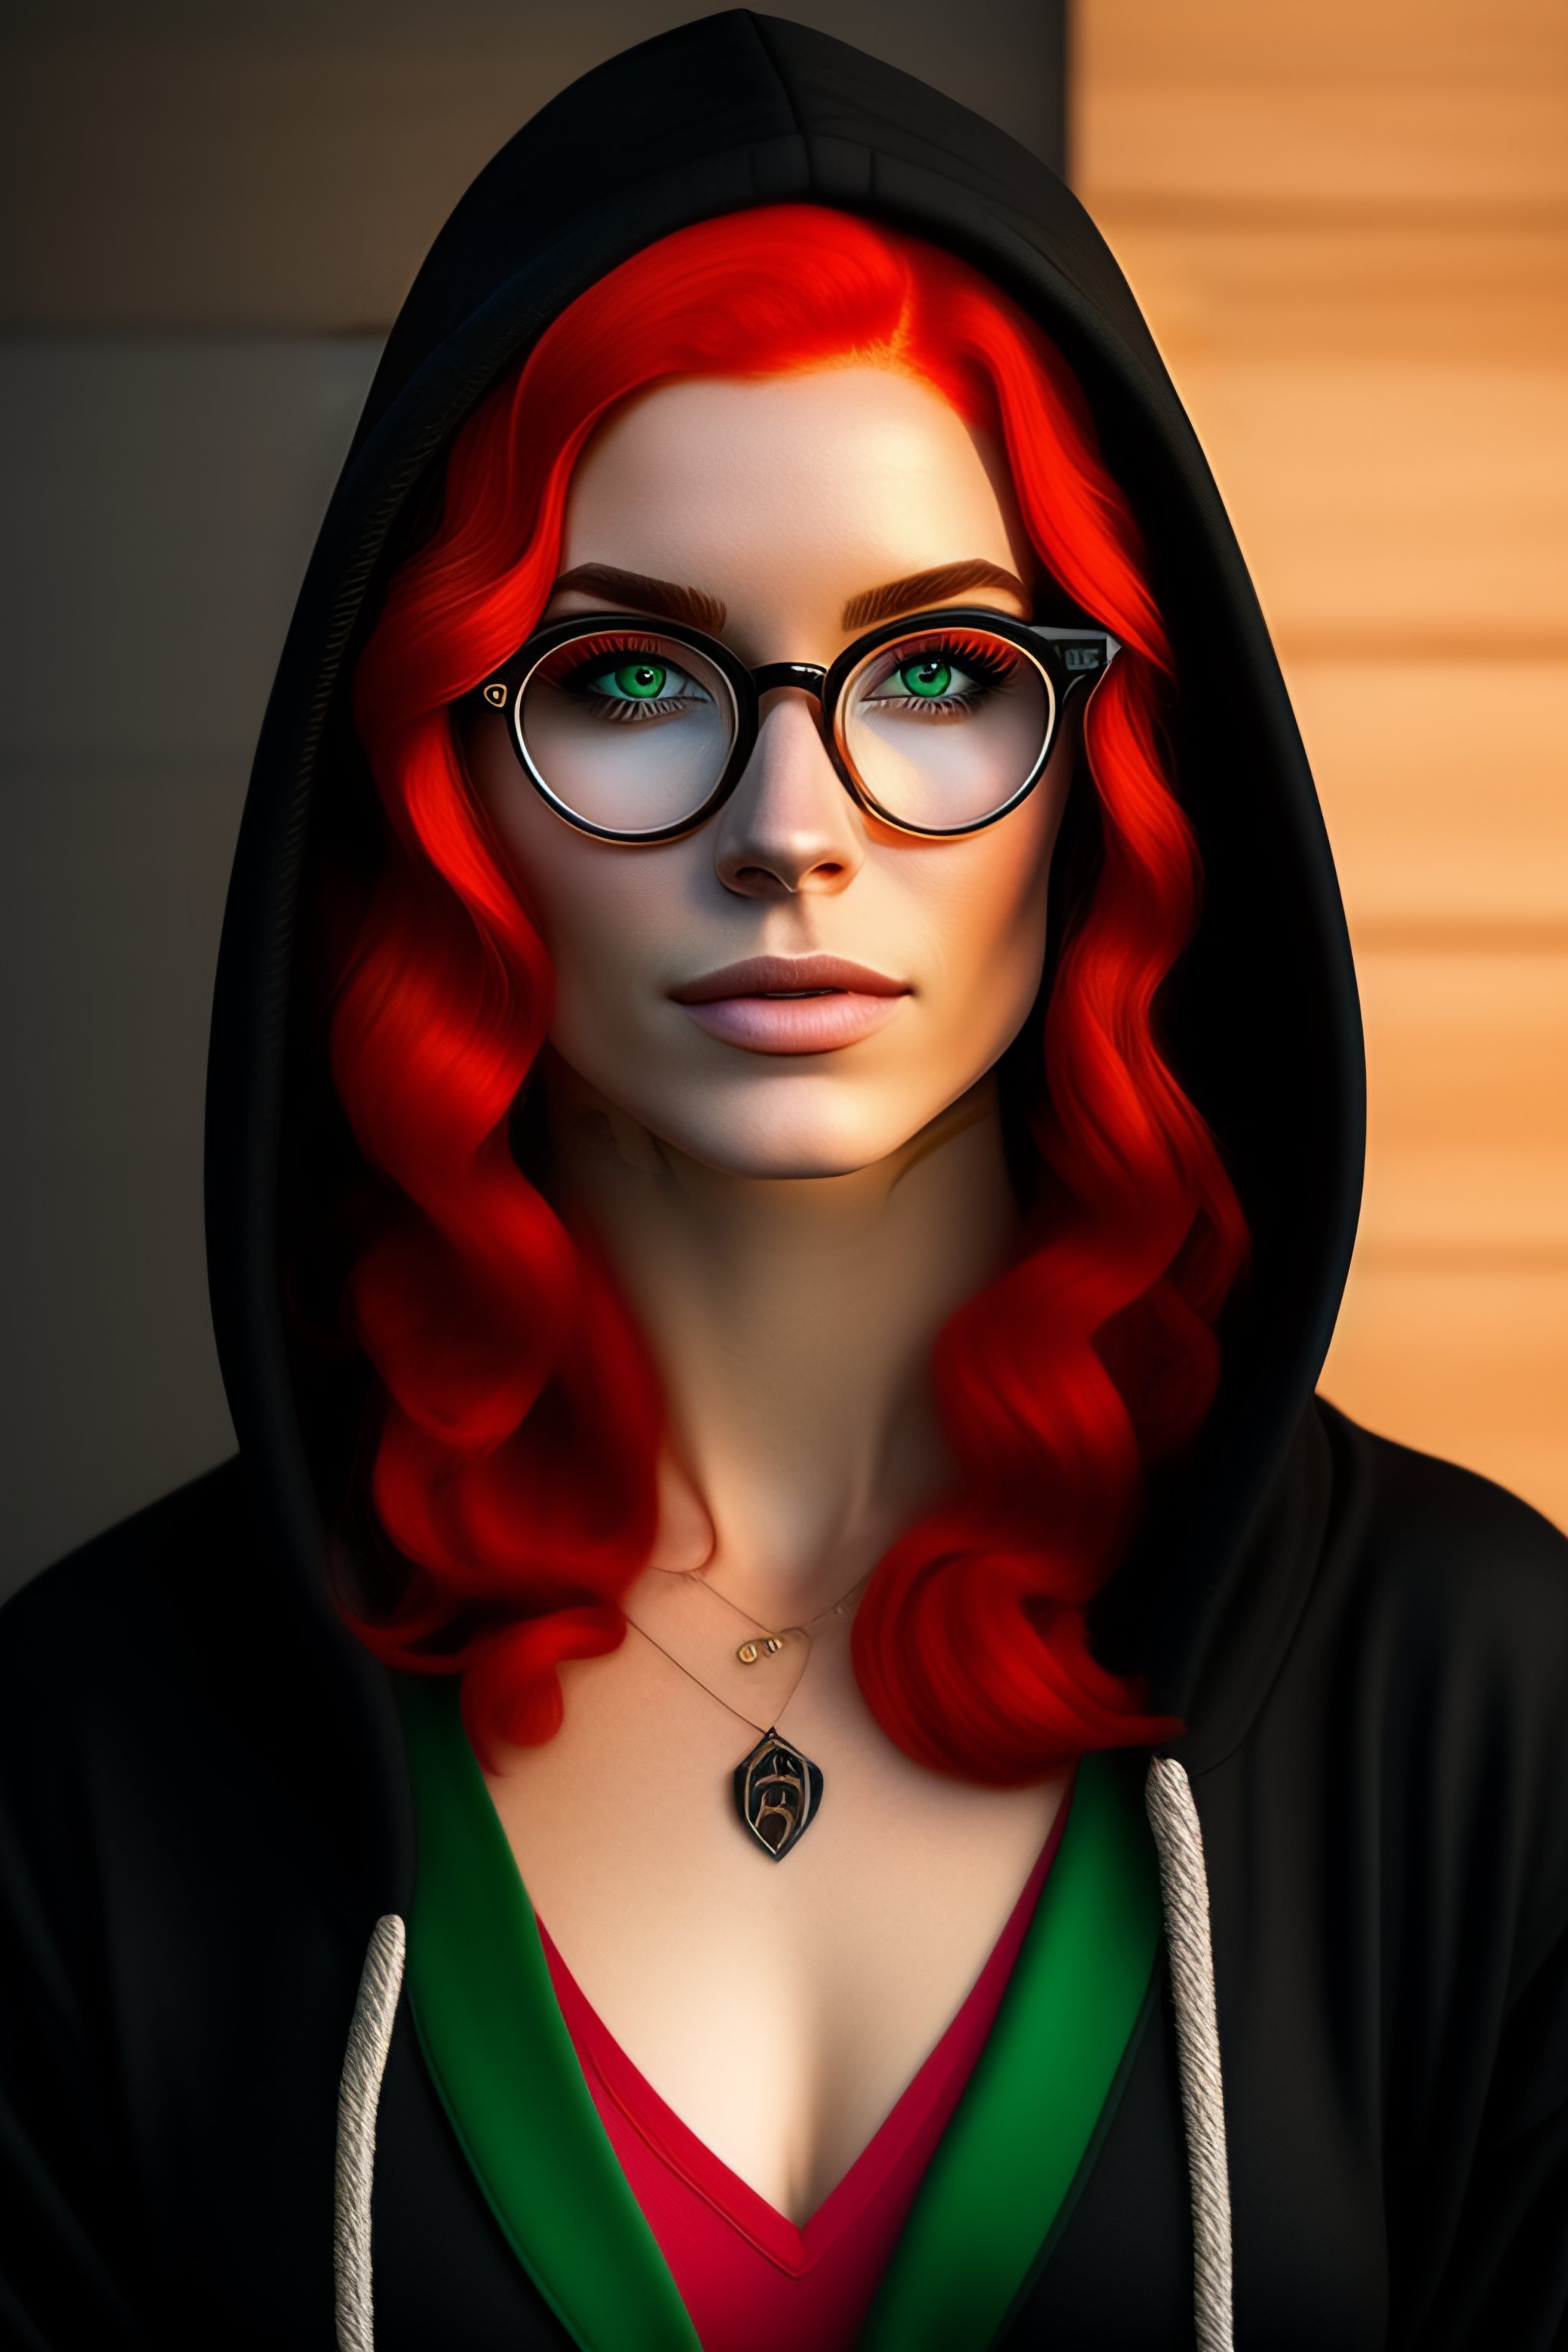 Lexica - A woman with red hair, green eyes, a Harry Potter glasses, and a  septum piercing. She is wearing a baggy black hoodie.